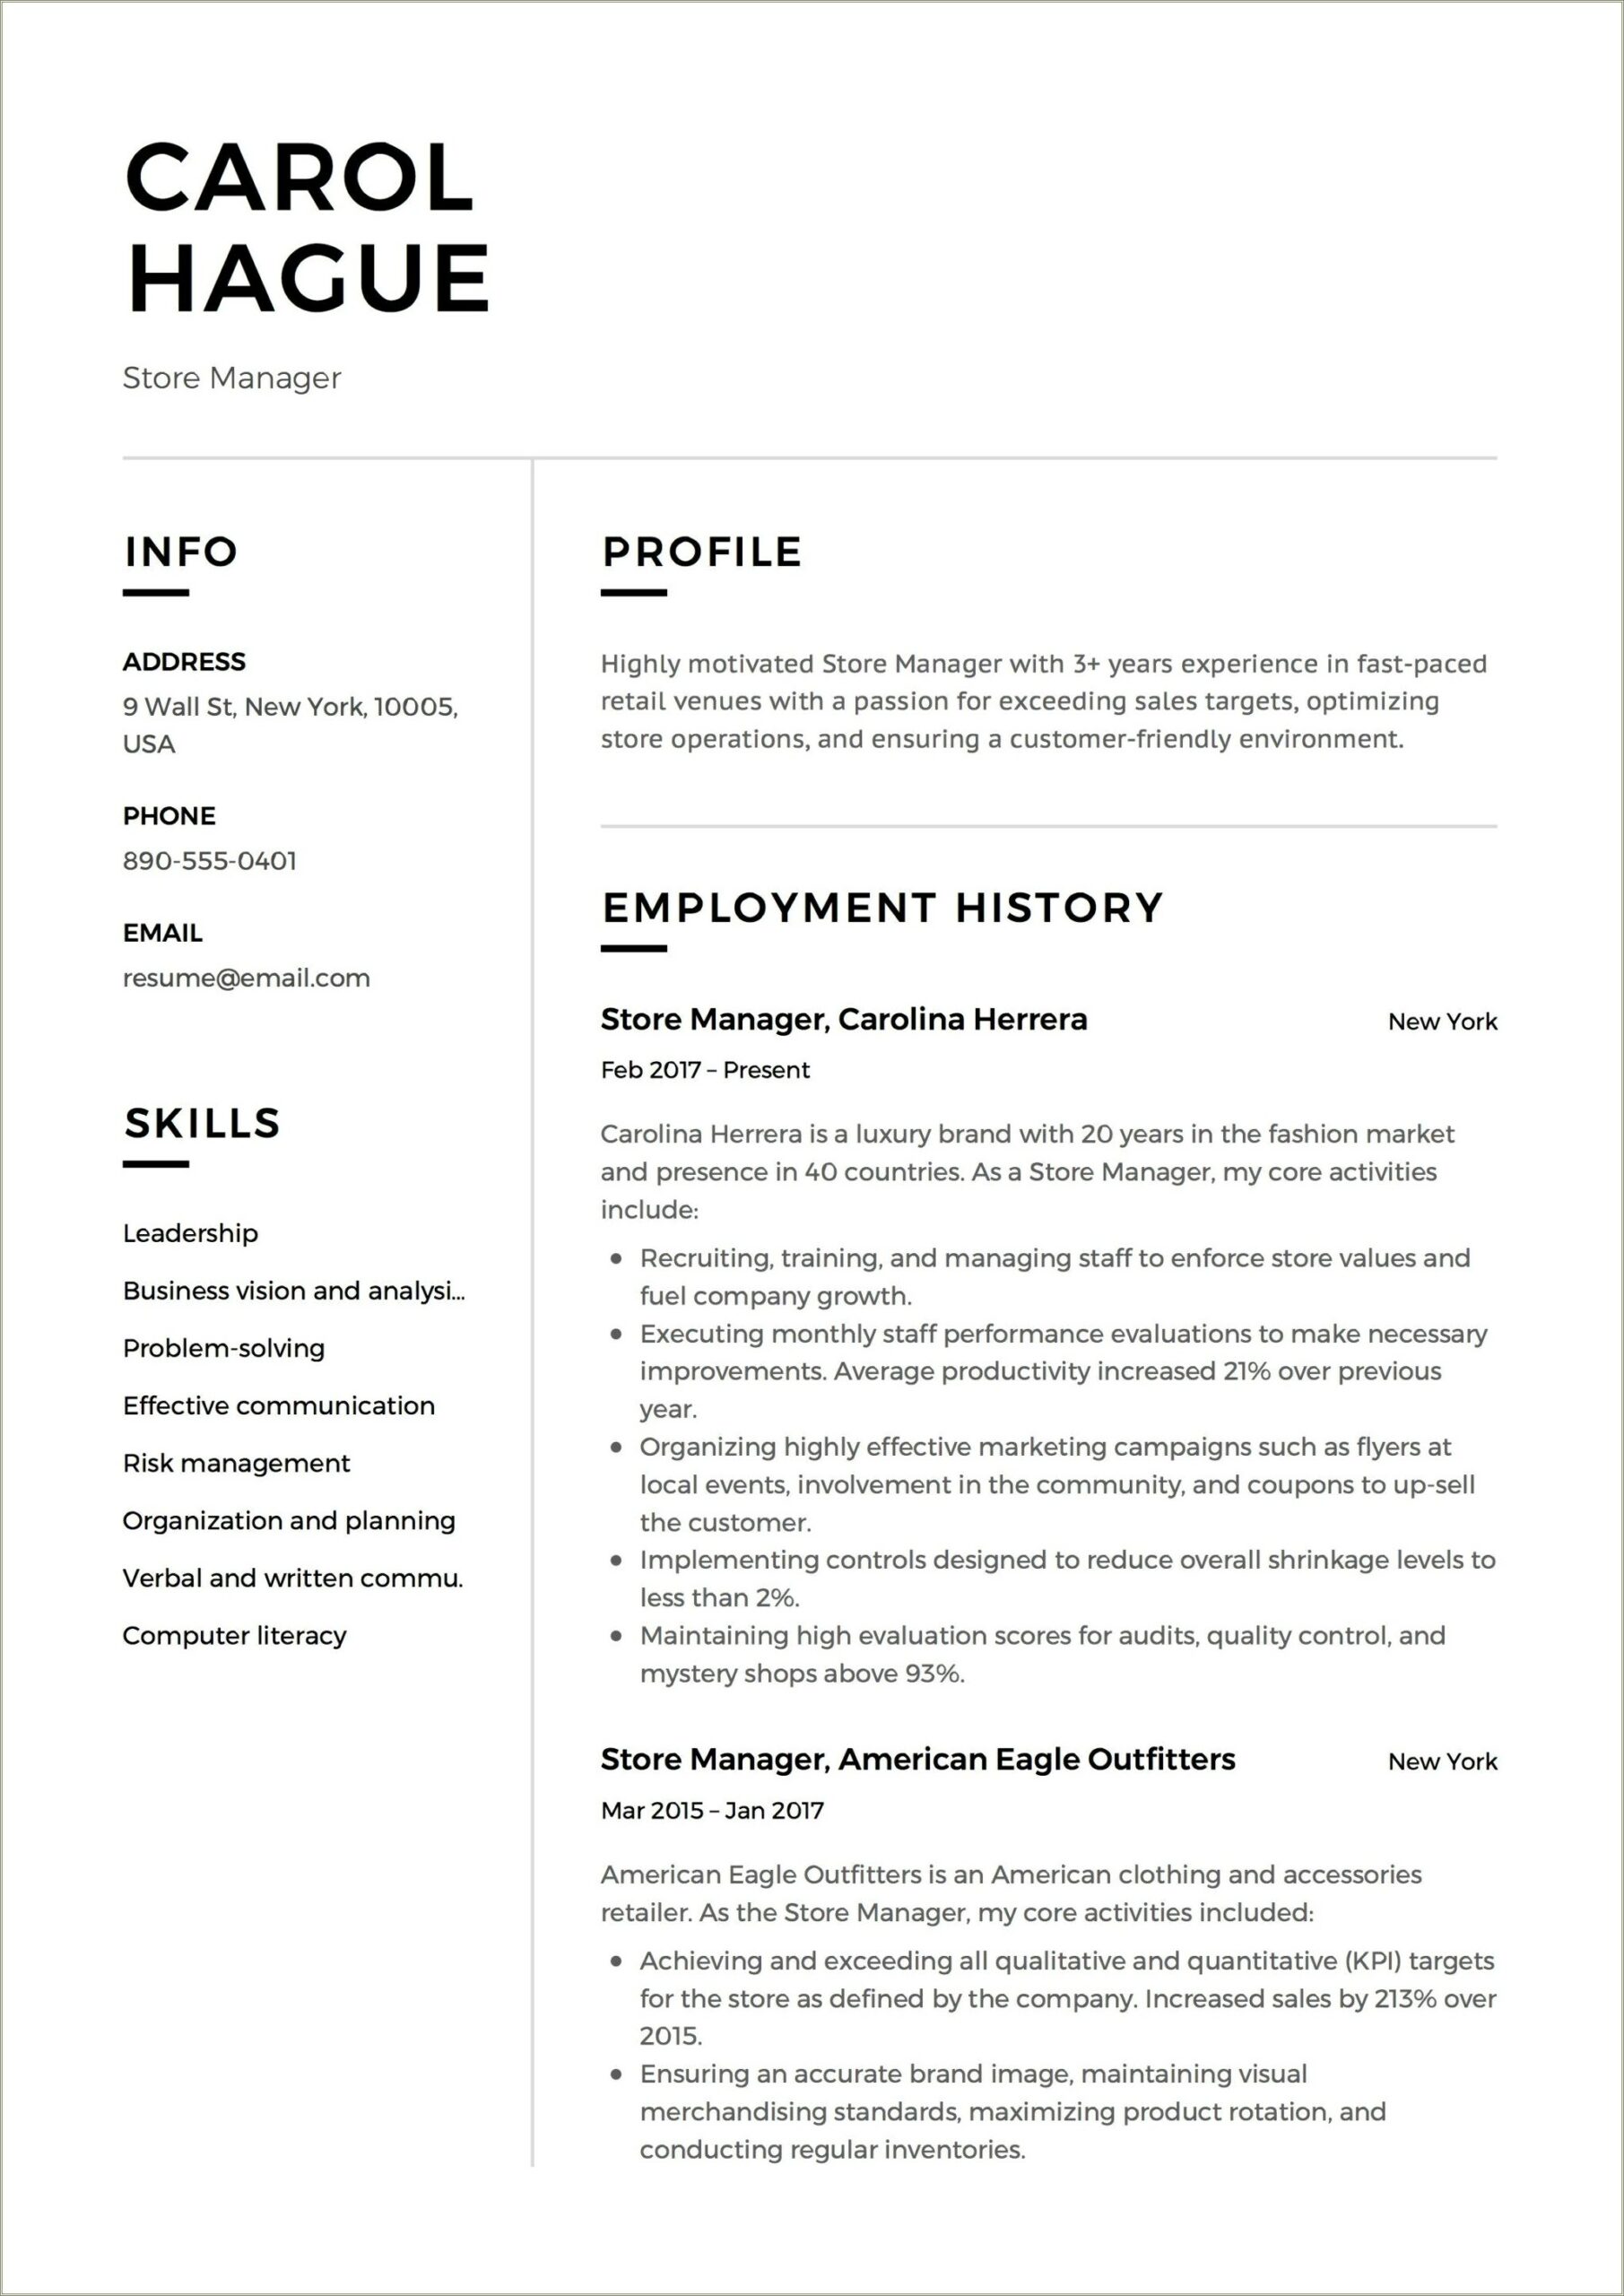 Resume Format For Retail Department Manager